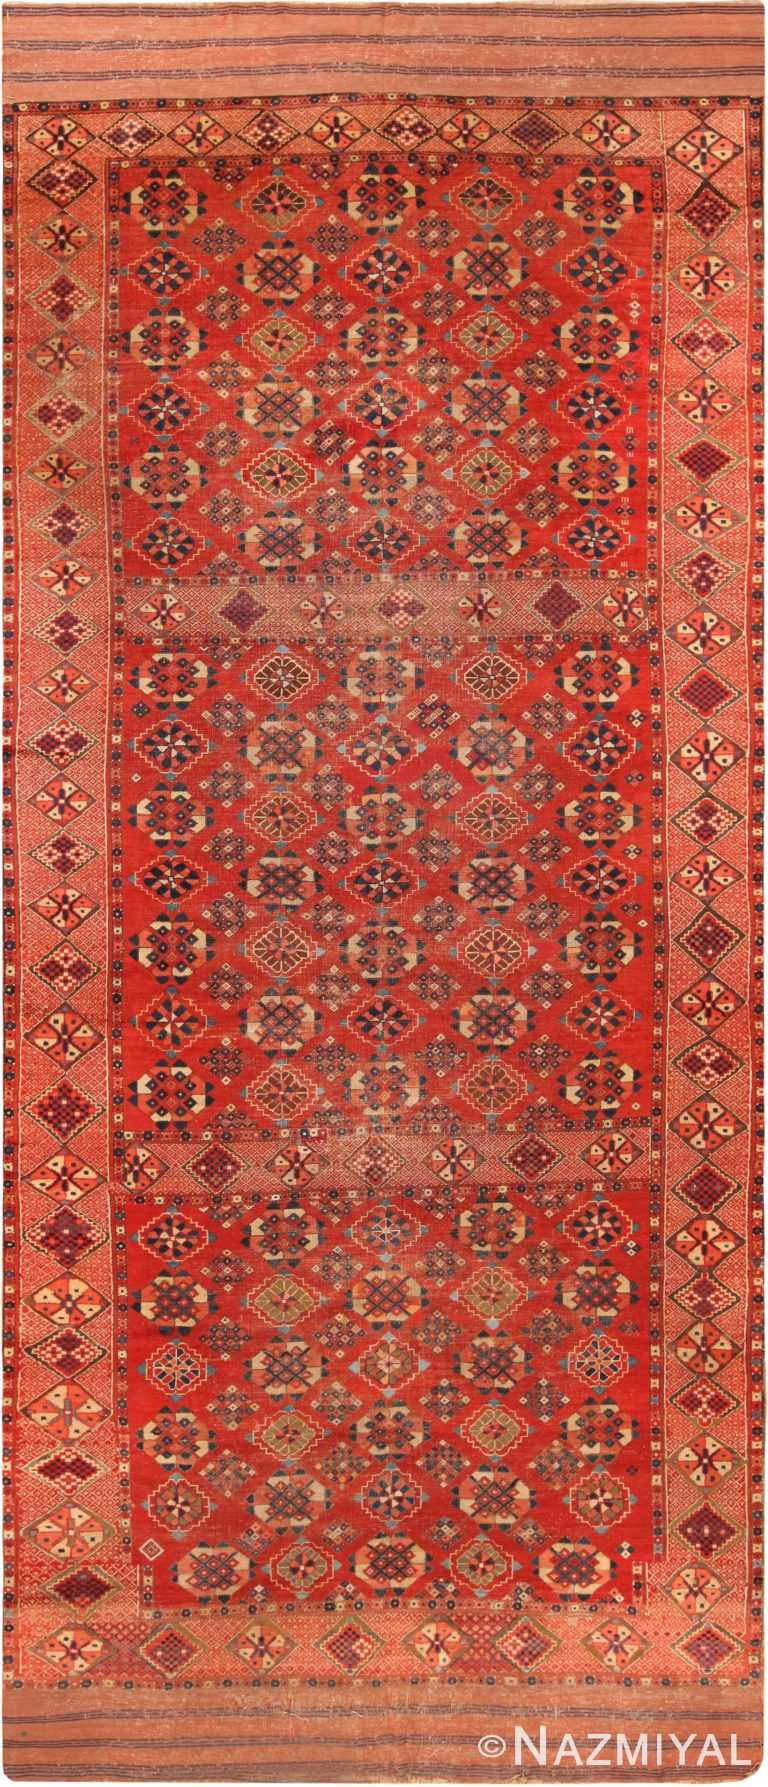 Gallery Size Antique Afghan Bashir Rug 71471 by Nazmiyal Antique Rugs